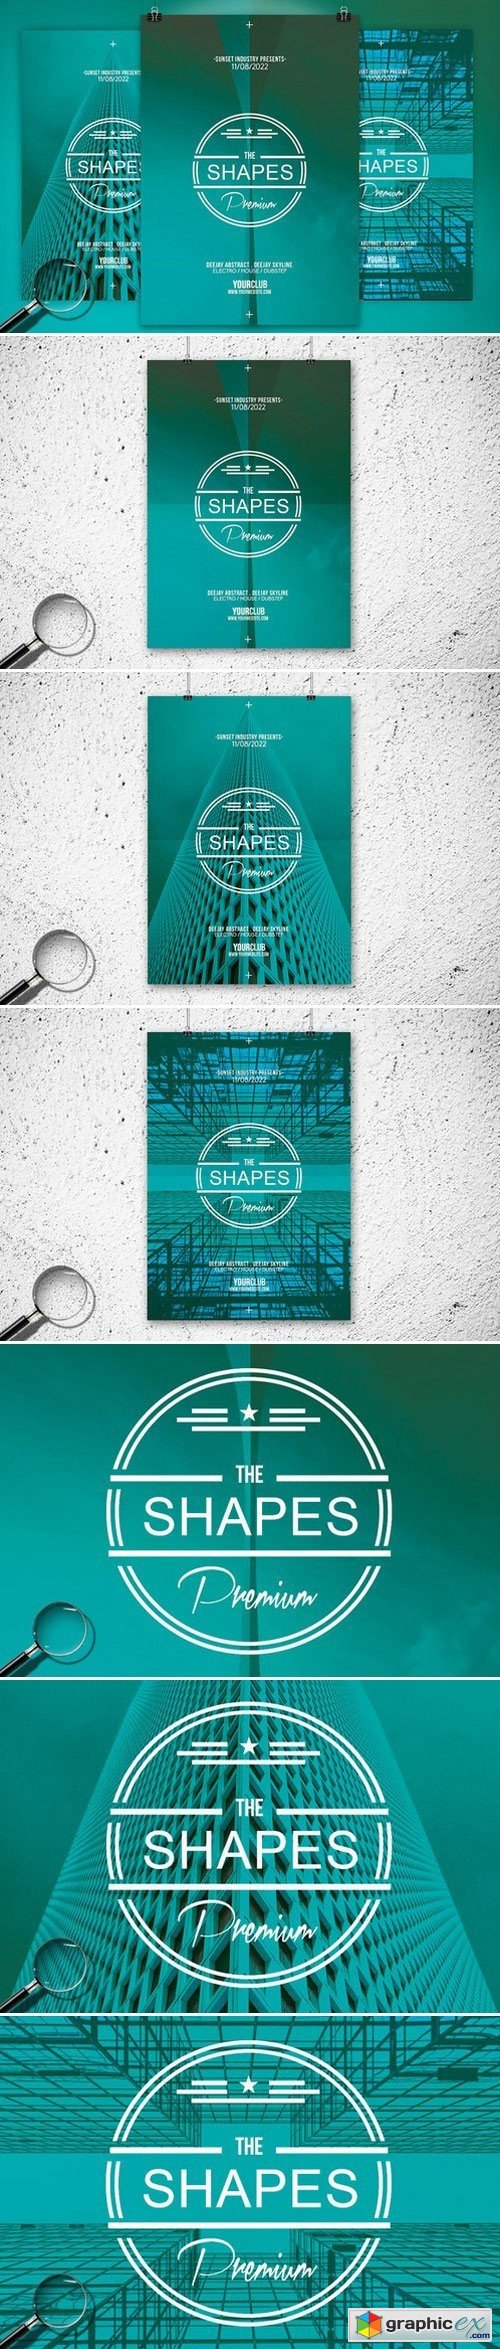 The Shapes | 3in1 Flyer Template